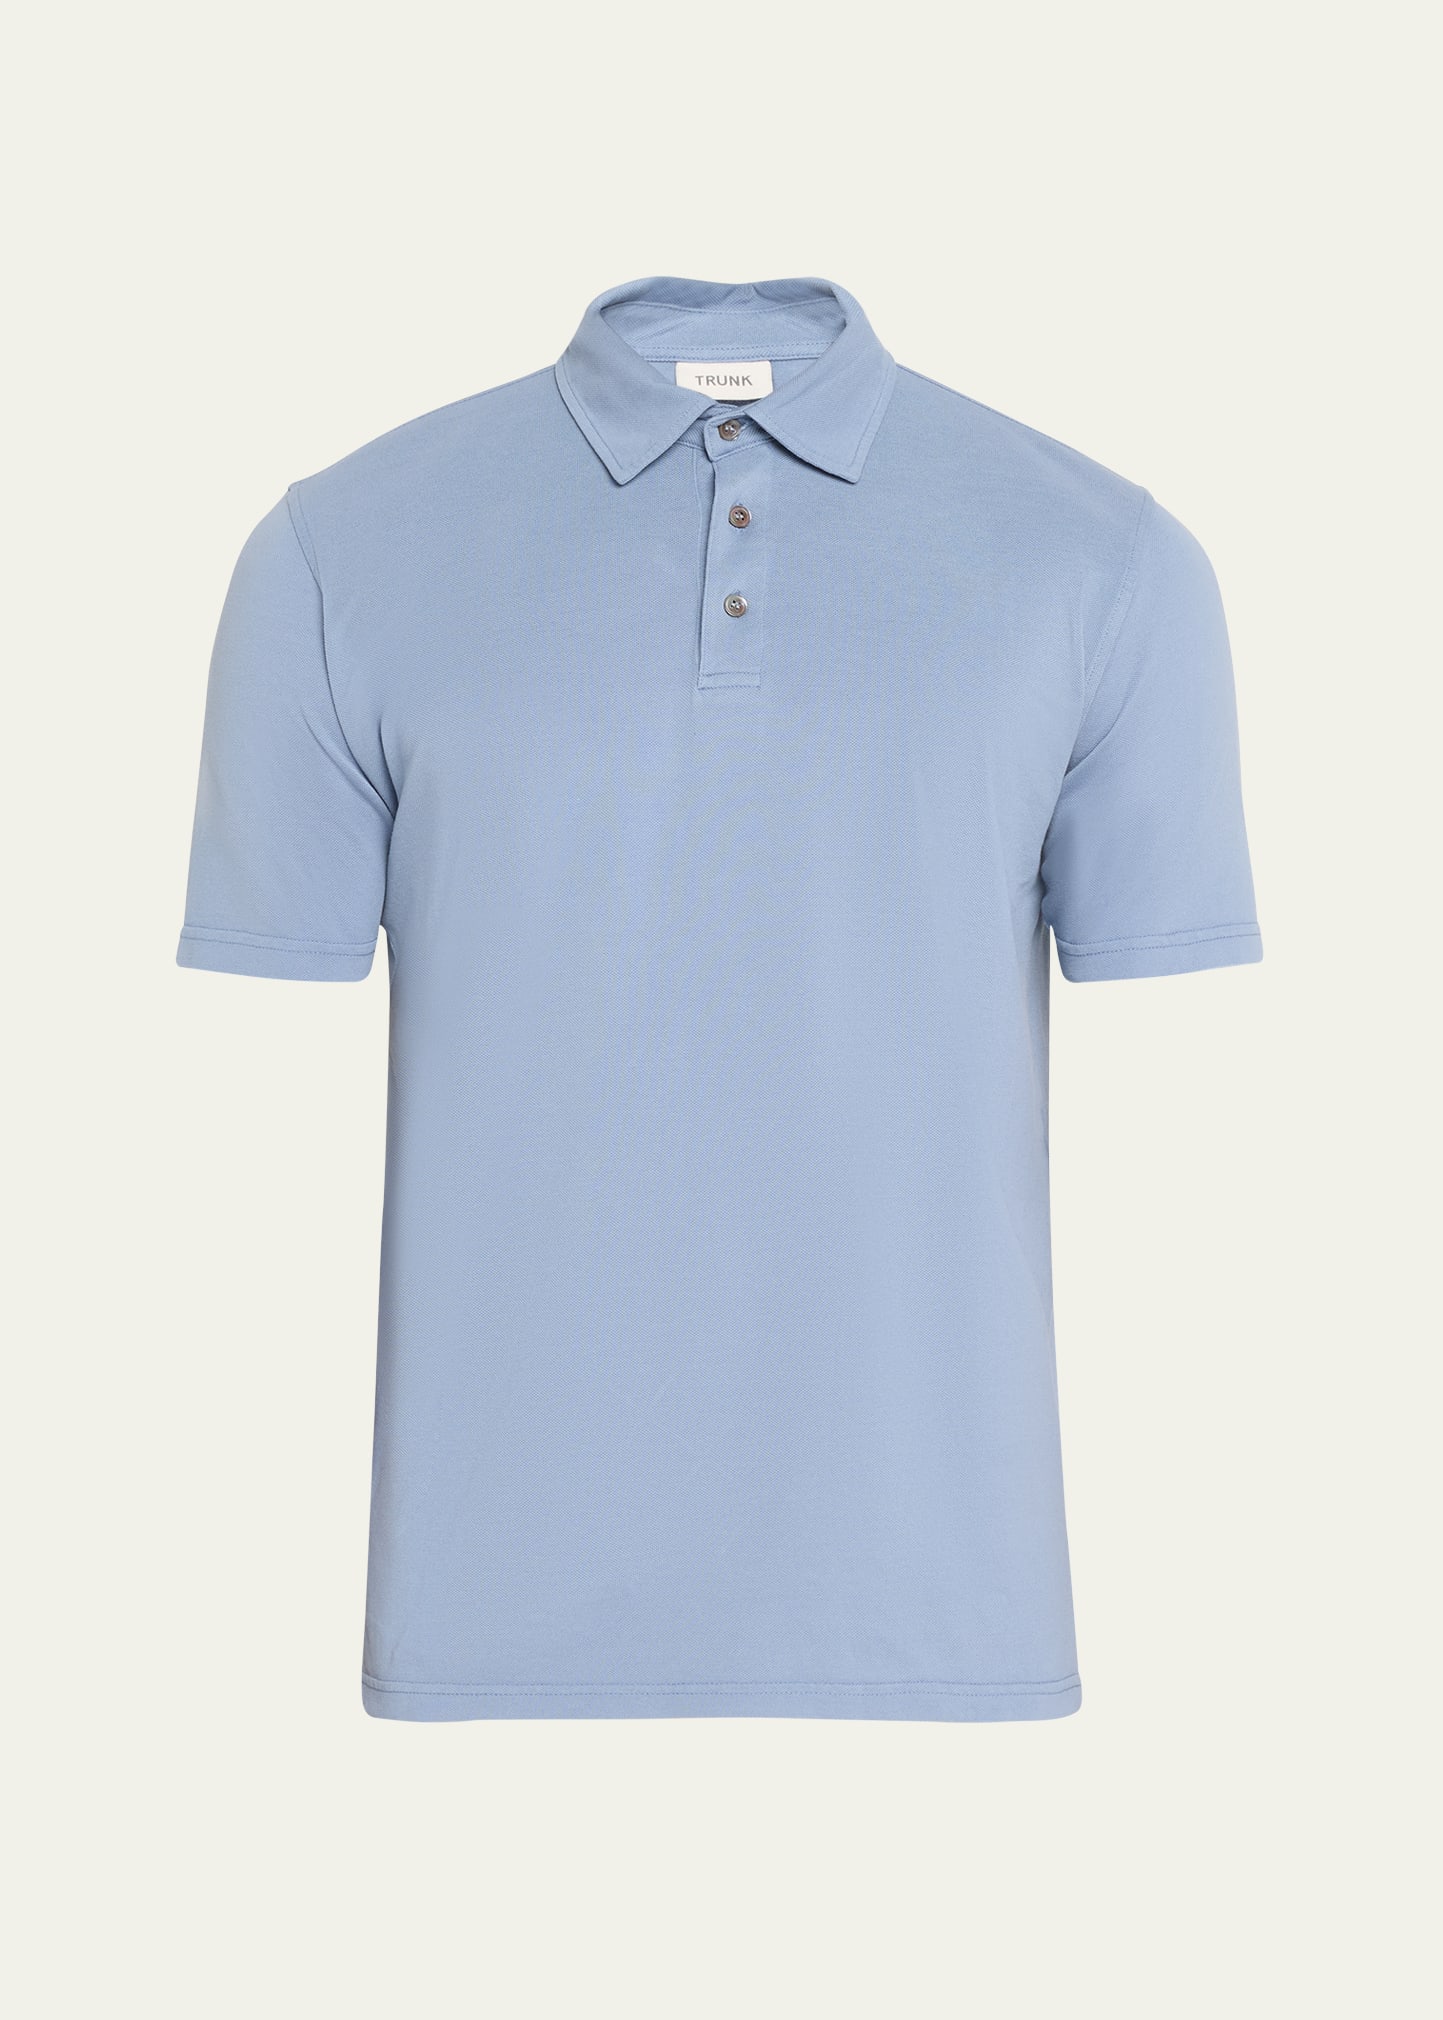 Trunk Men's Moxon Solid Polo Shirt In Blue